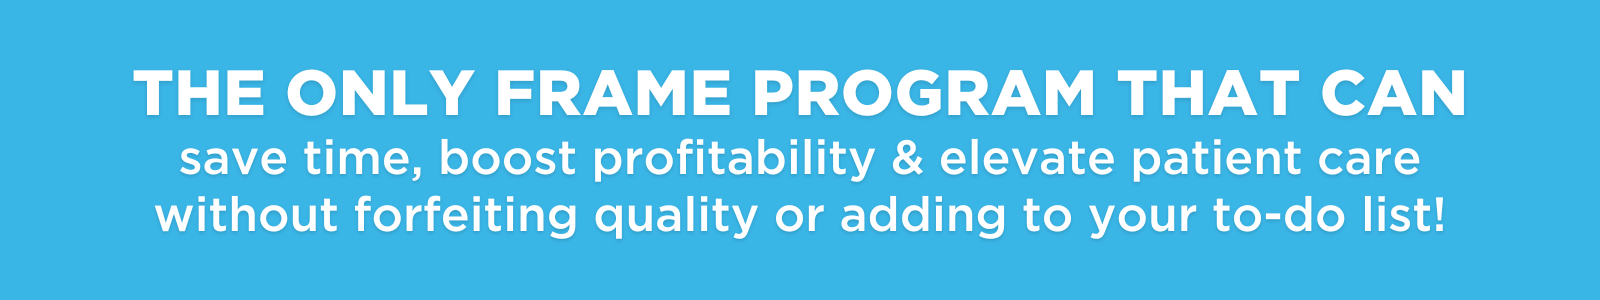 THE ONLY FRAME PROGRAM THAT CAN save time, boost profitability &amp; elevate patient care without forfeiting quality or adding to your to-do list!